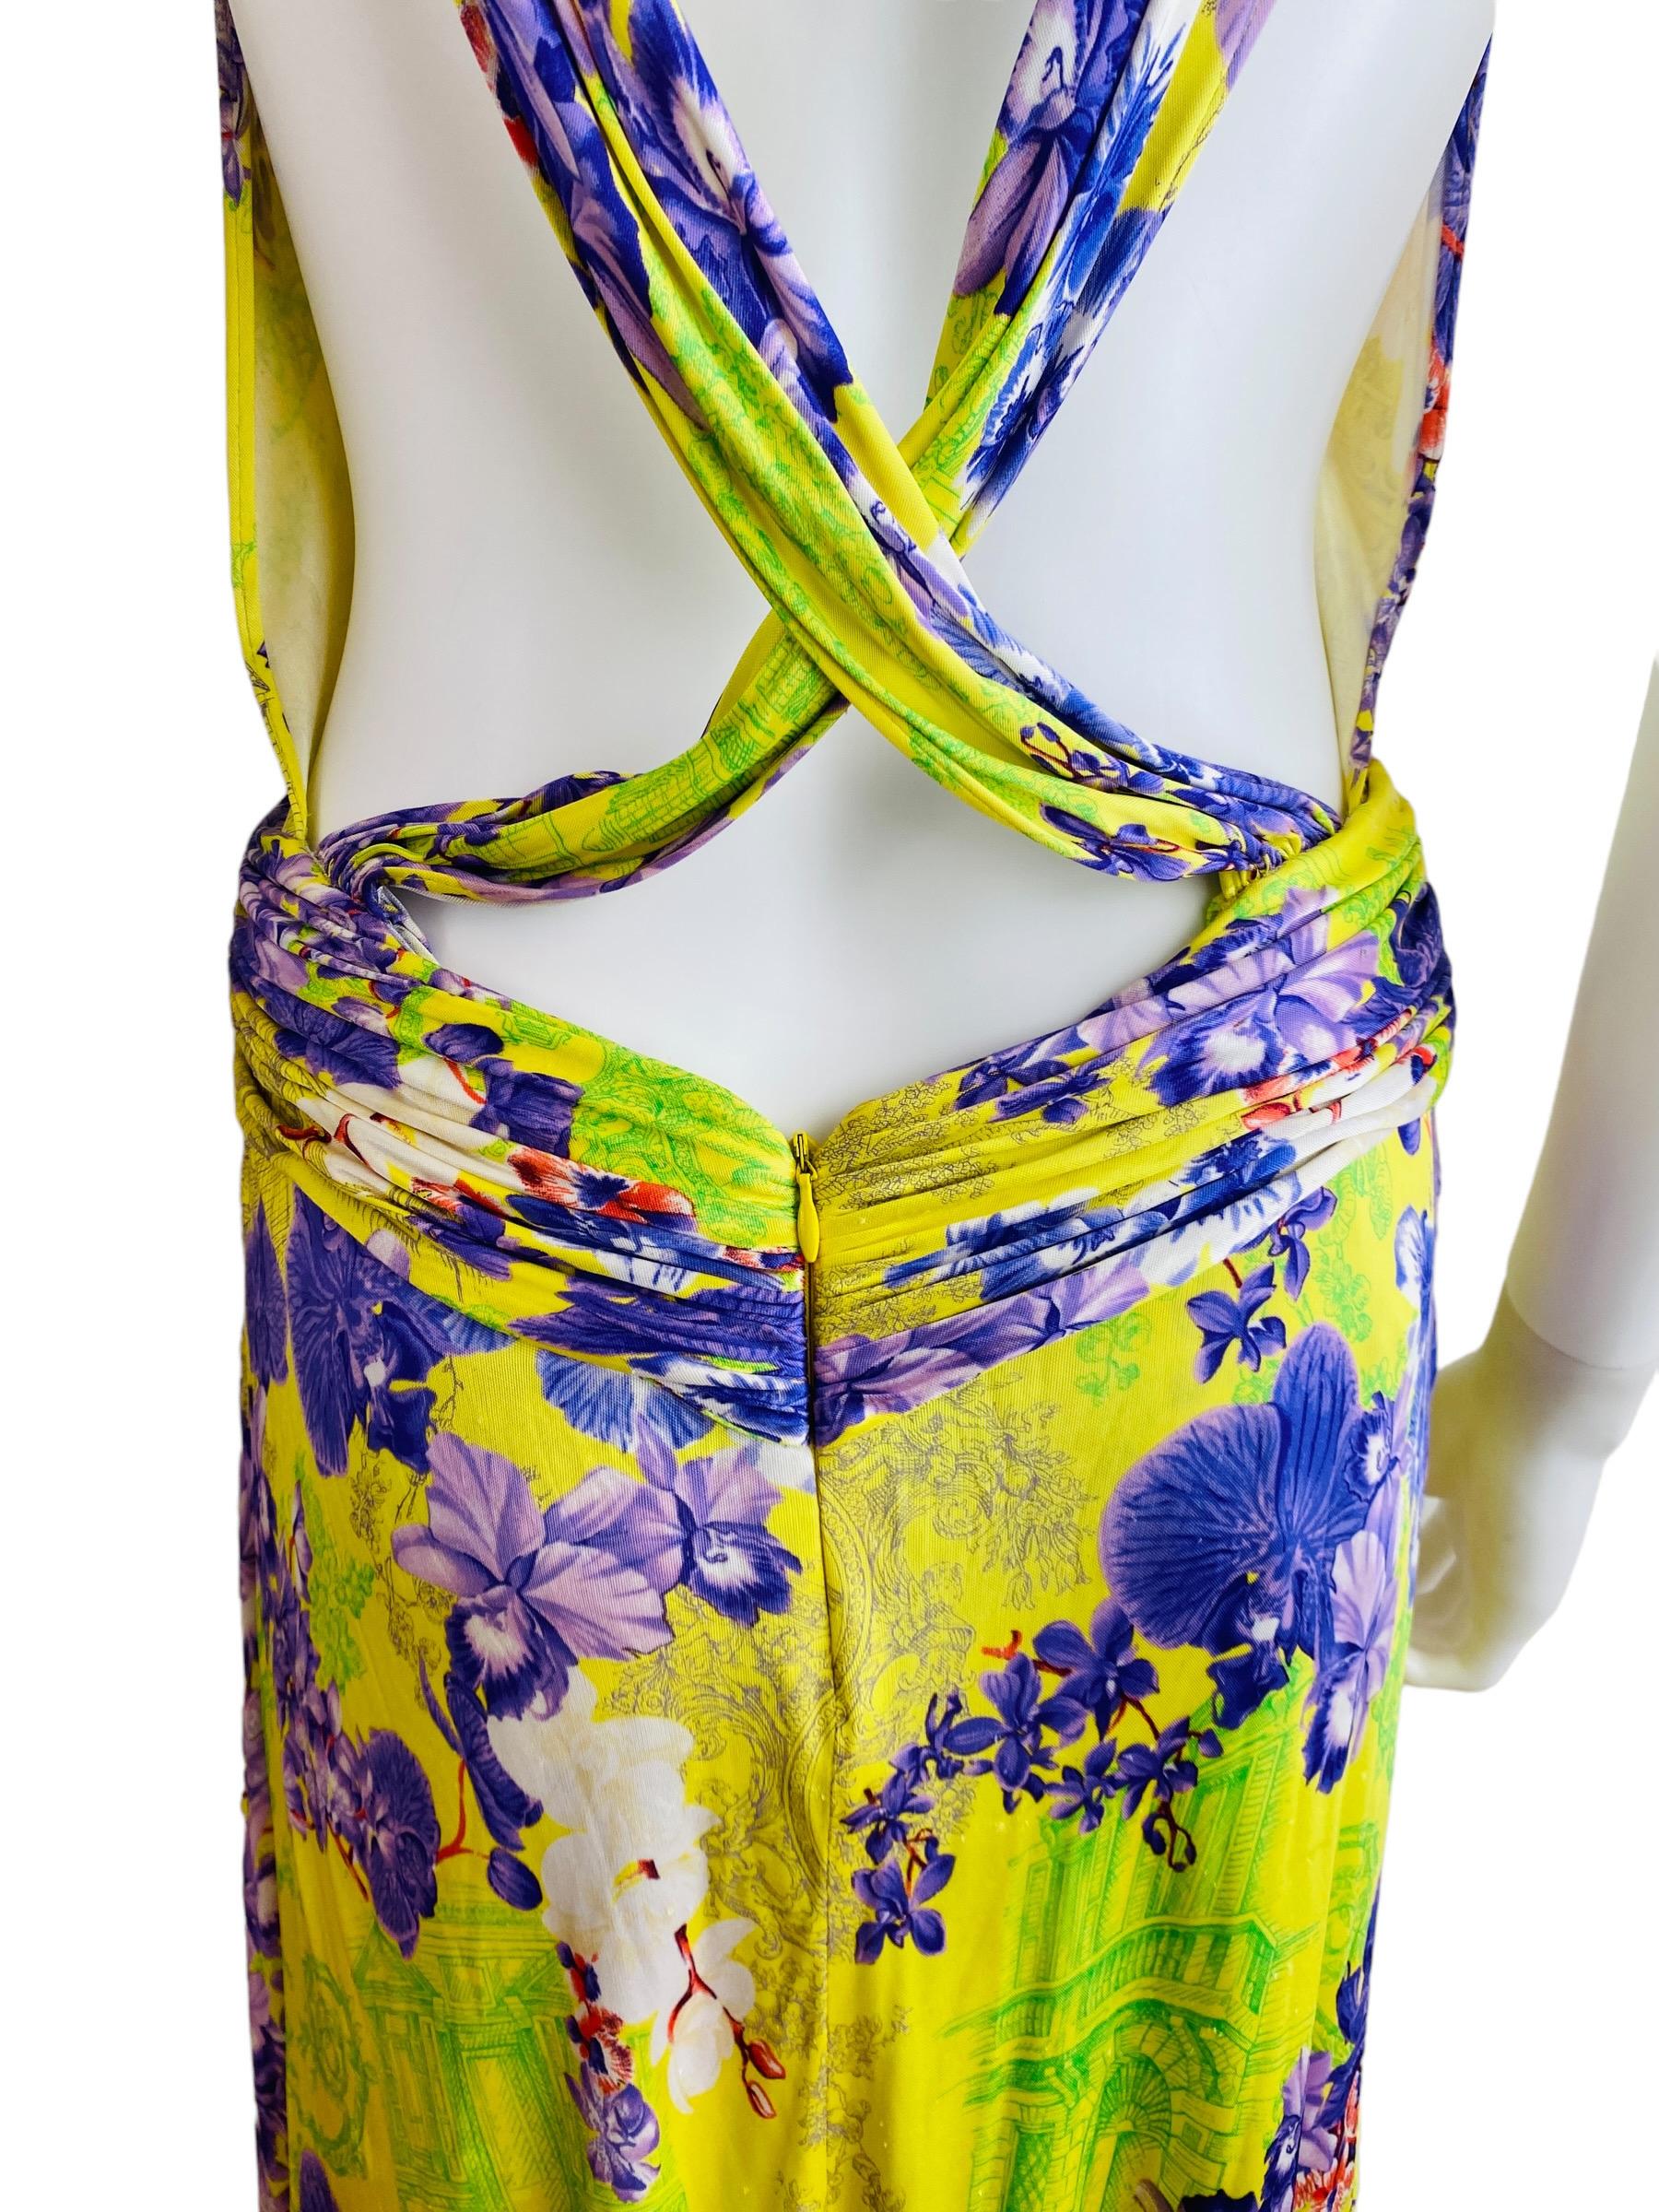 Vintage S/S 2004 Versace Dress Bright Yellow + Purple Orchid Floral Runway For Sale 11